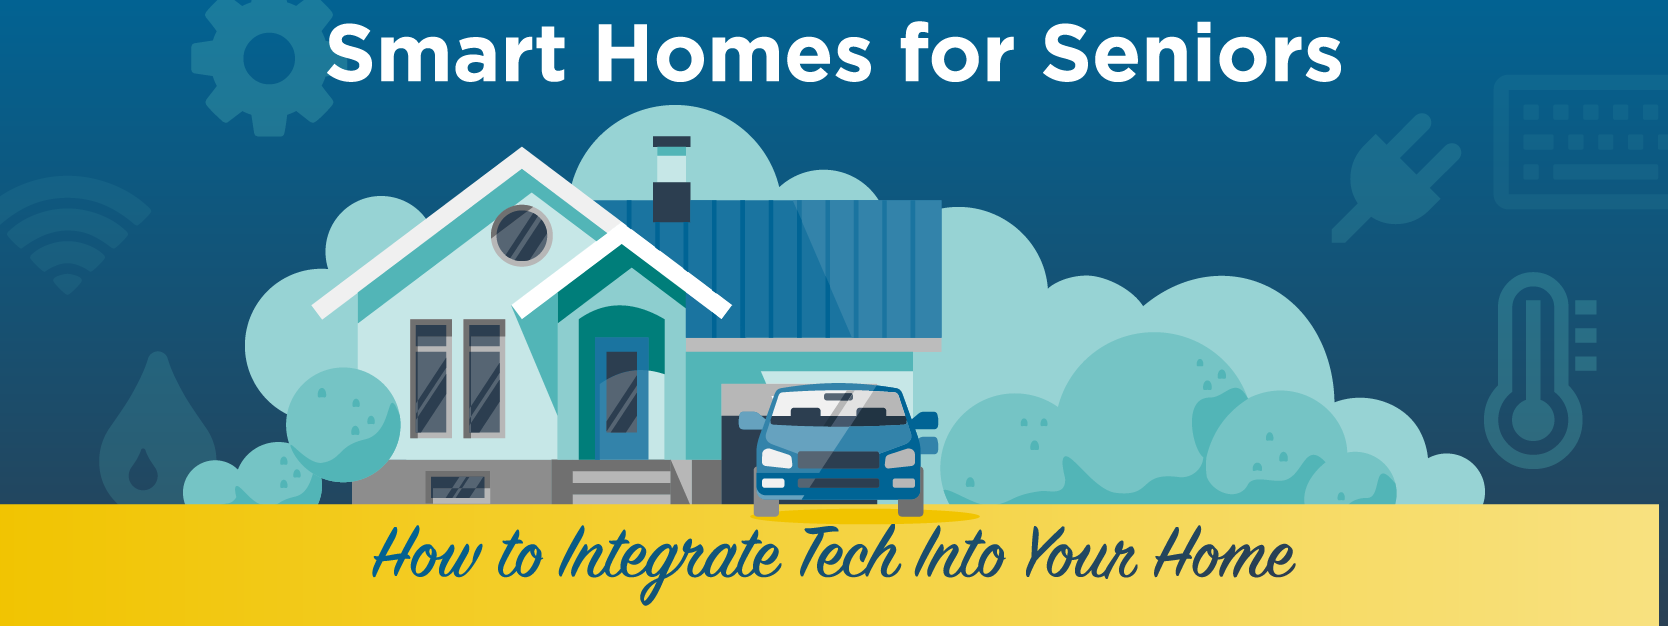 Smart Homes for Seniors: How to Integrate Tech into Your Home